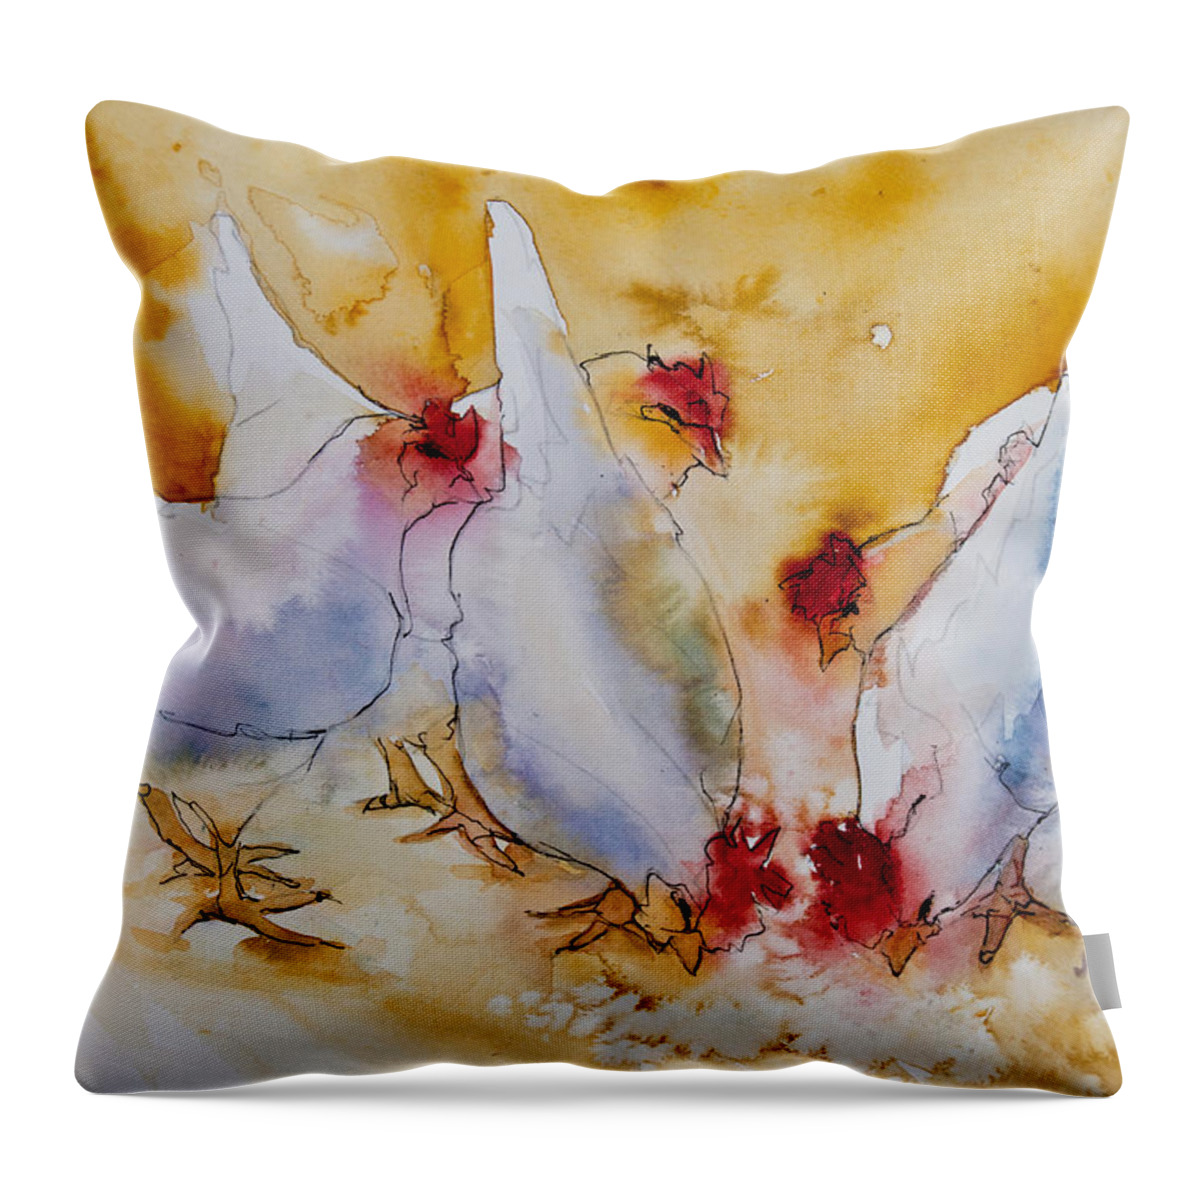 Chickens Throw Pillow featuring the painting Chickens Feed by Jani Freimann